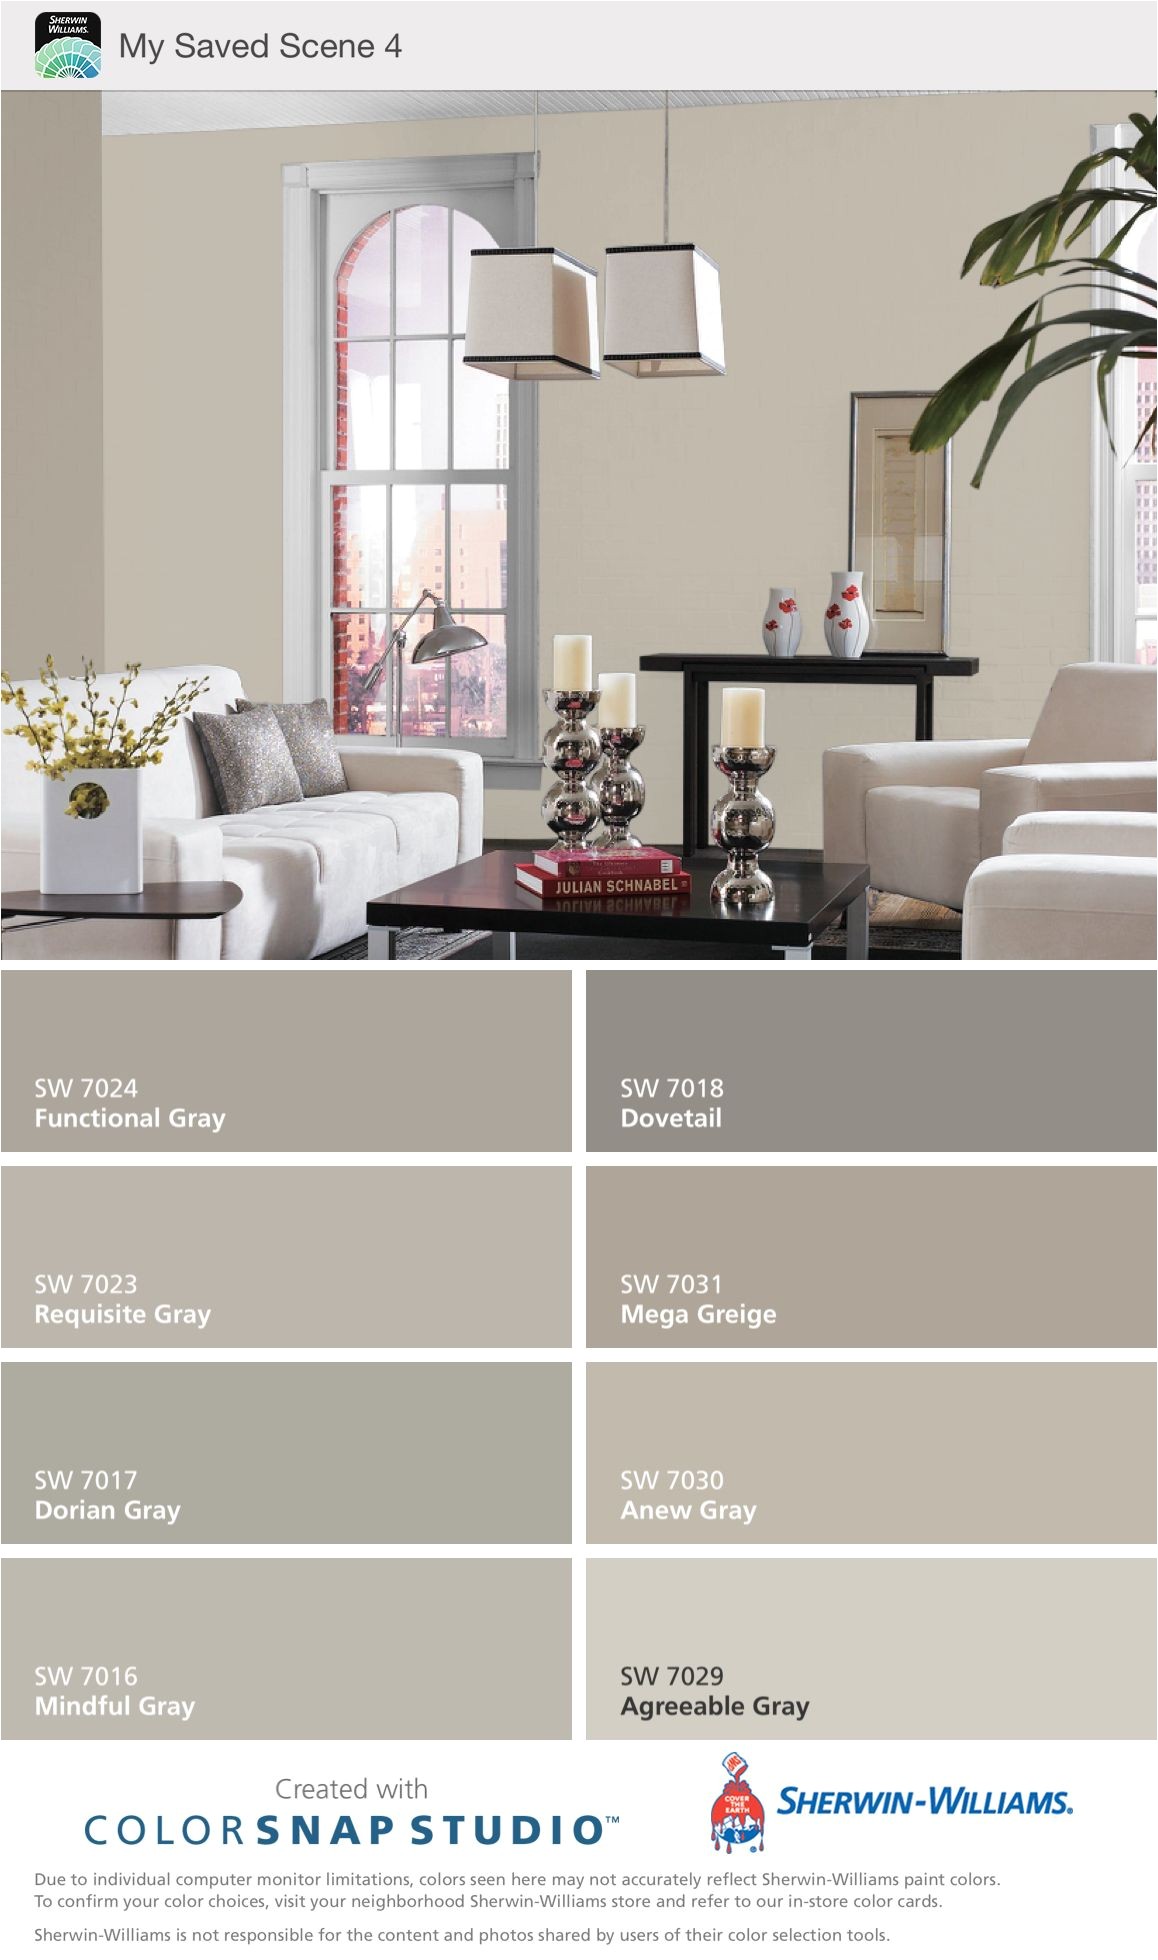 mega greige anew gray sherwin williams warm grays my choice for gray color scheme